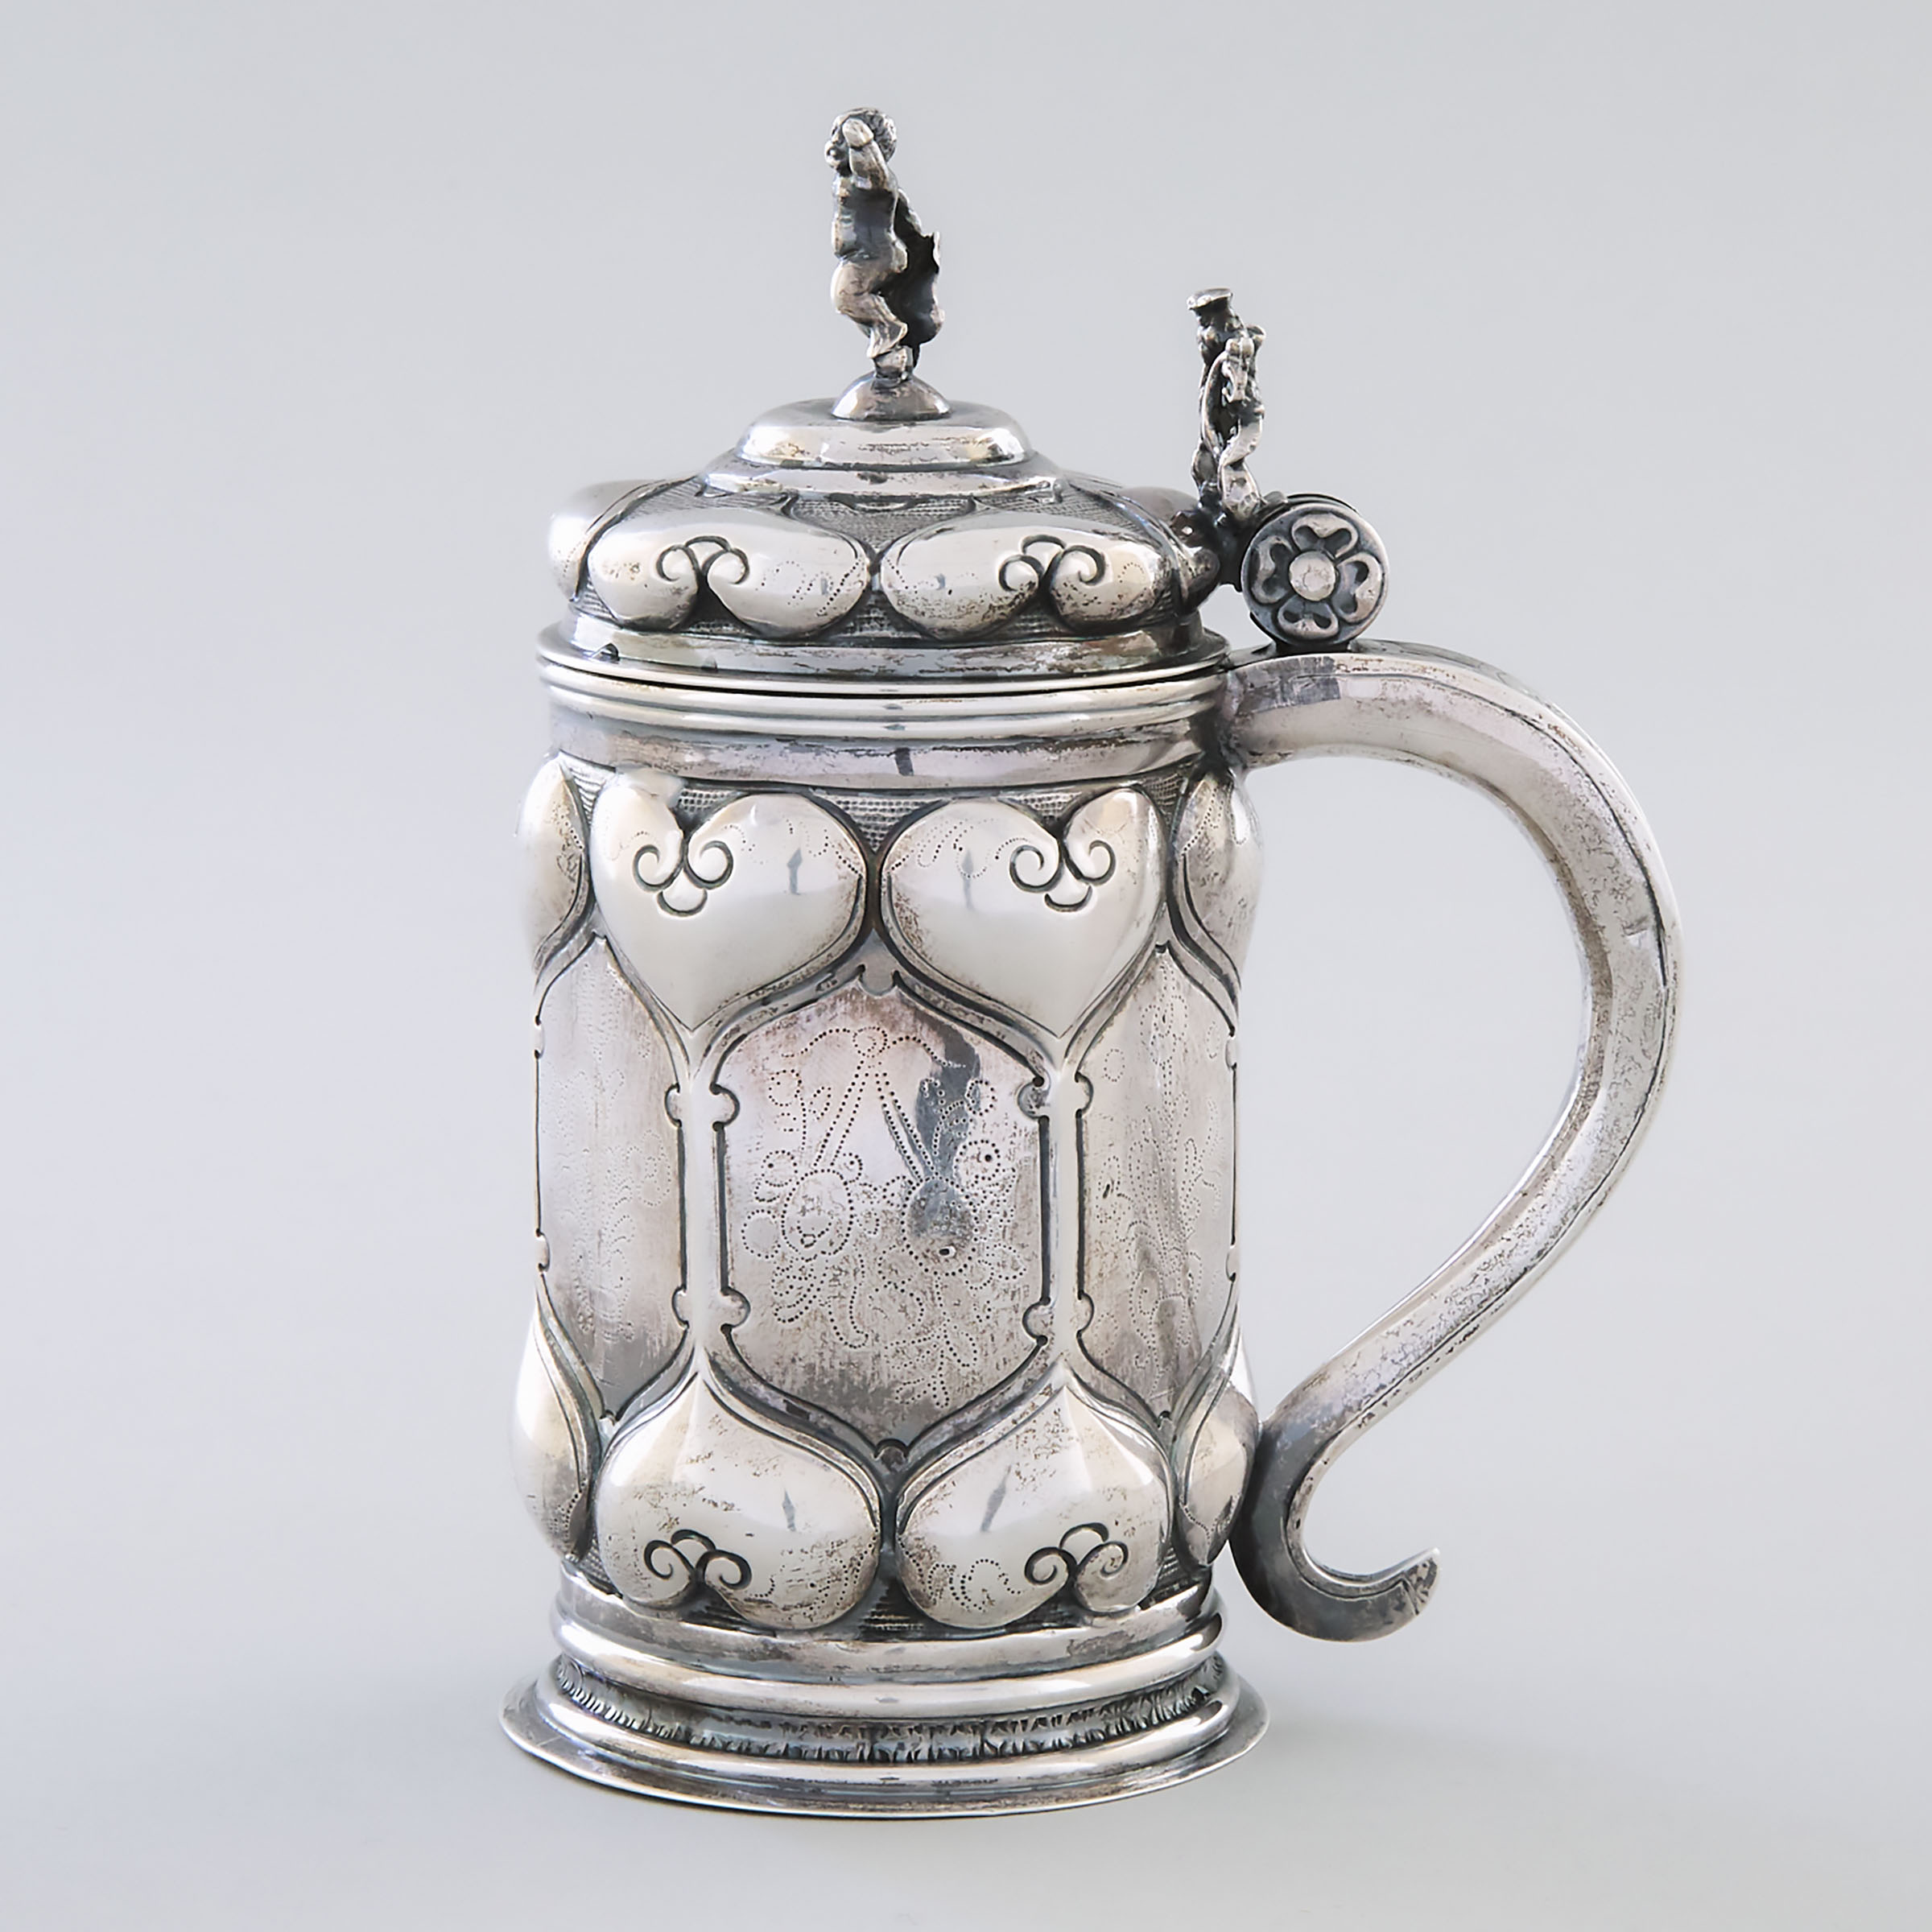 German Silver Small Tankard, probably late 19th century